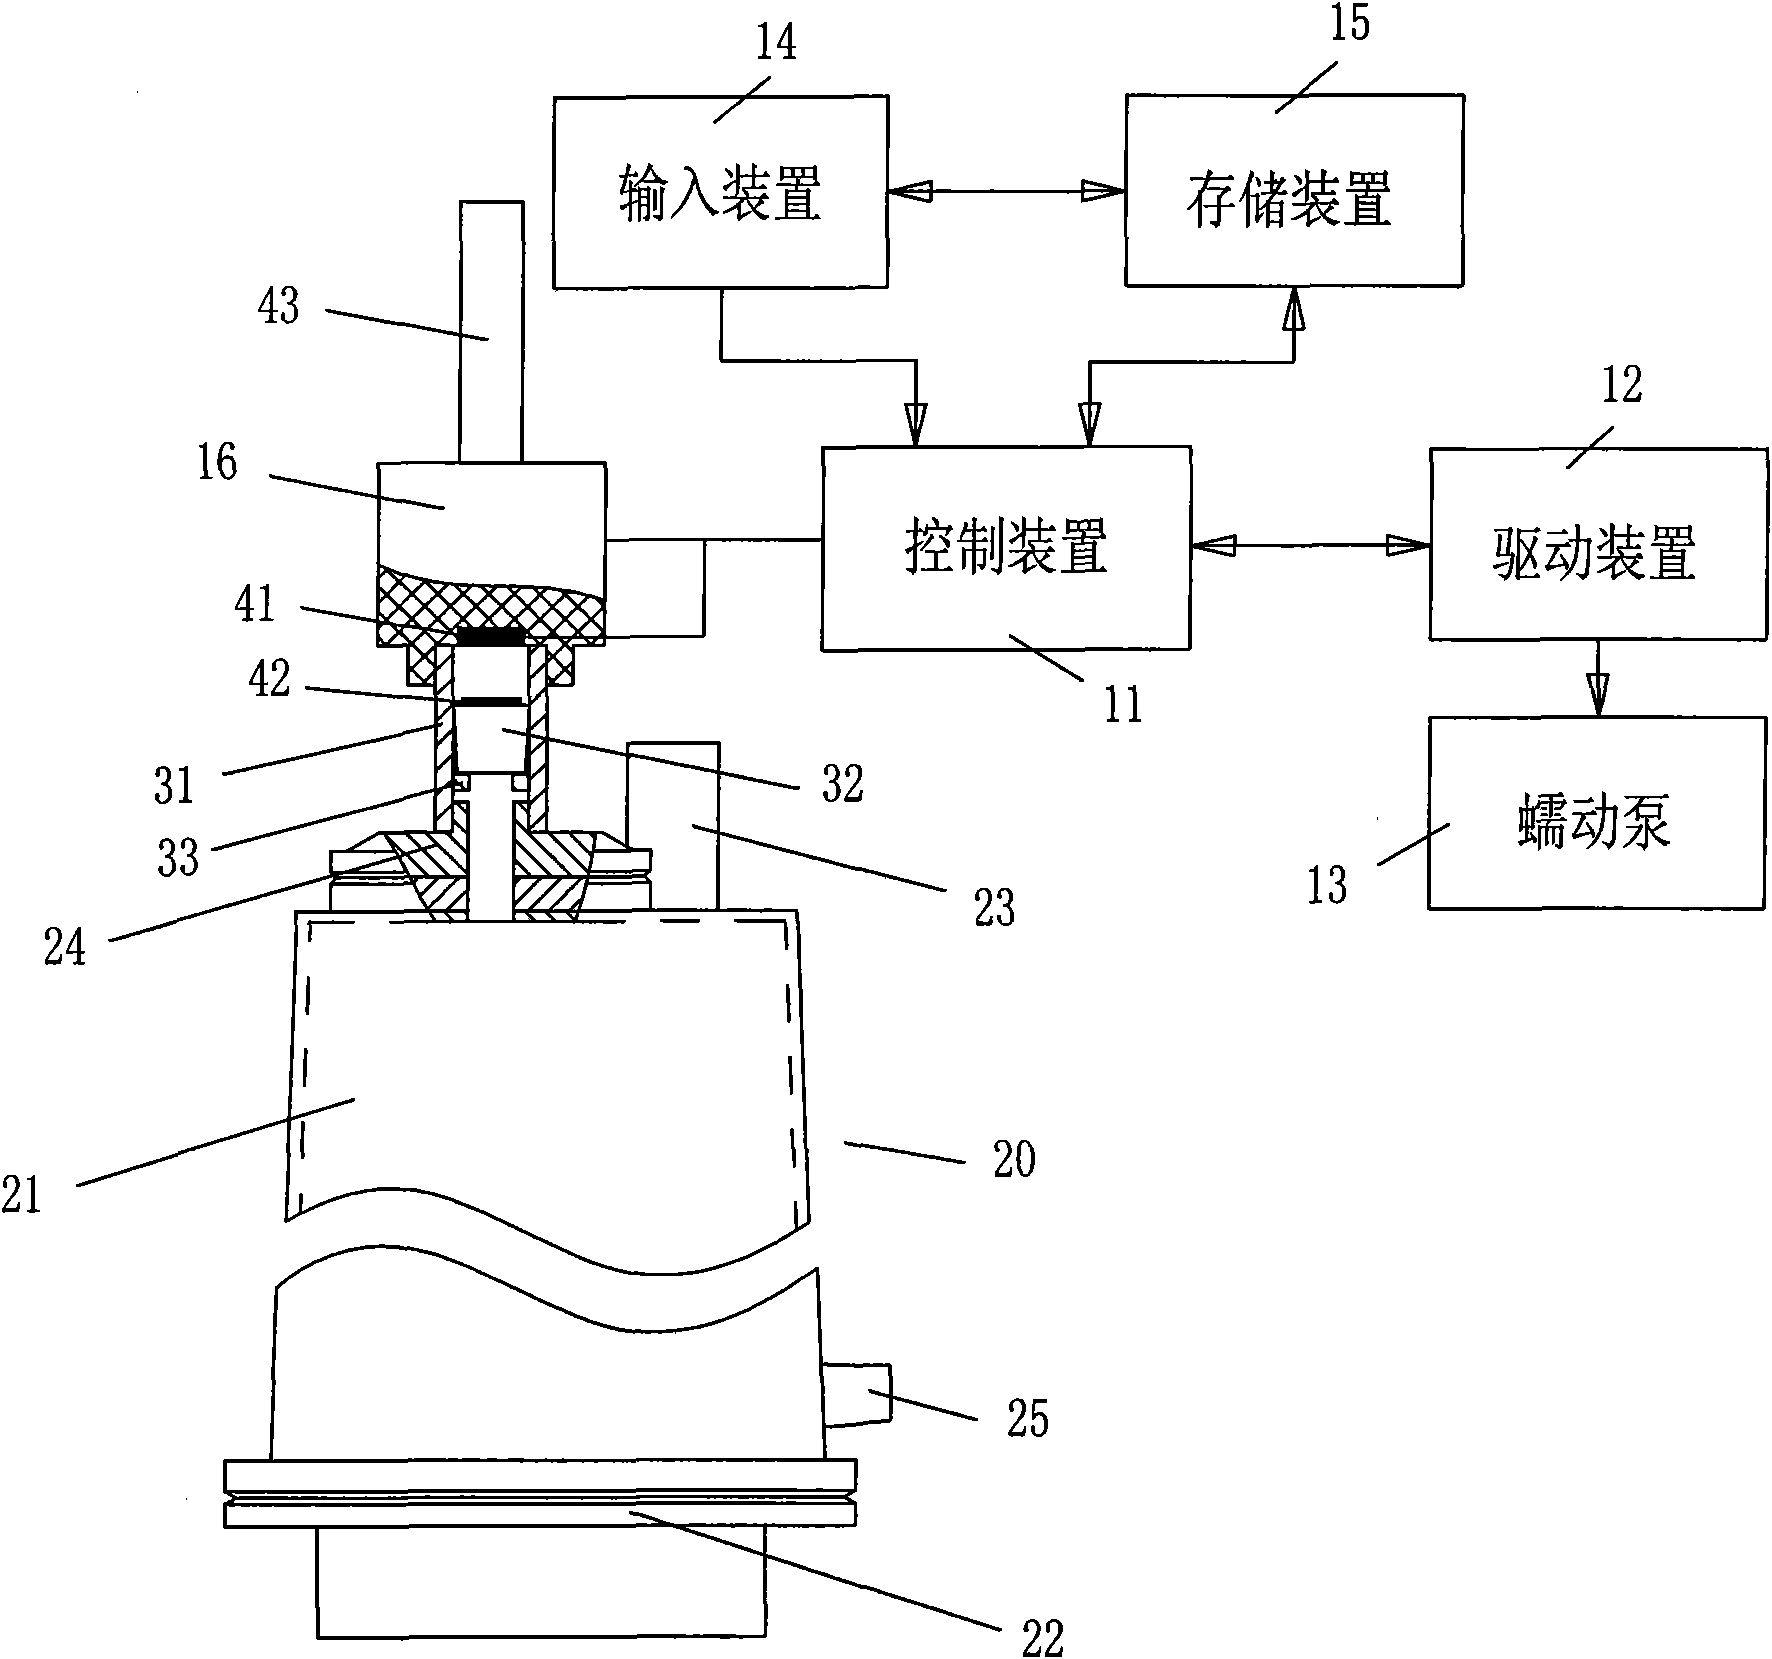 Pressure detection device and microbial detection film system